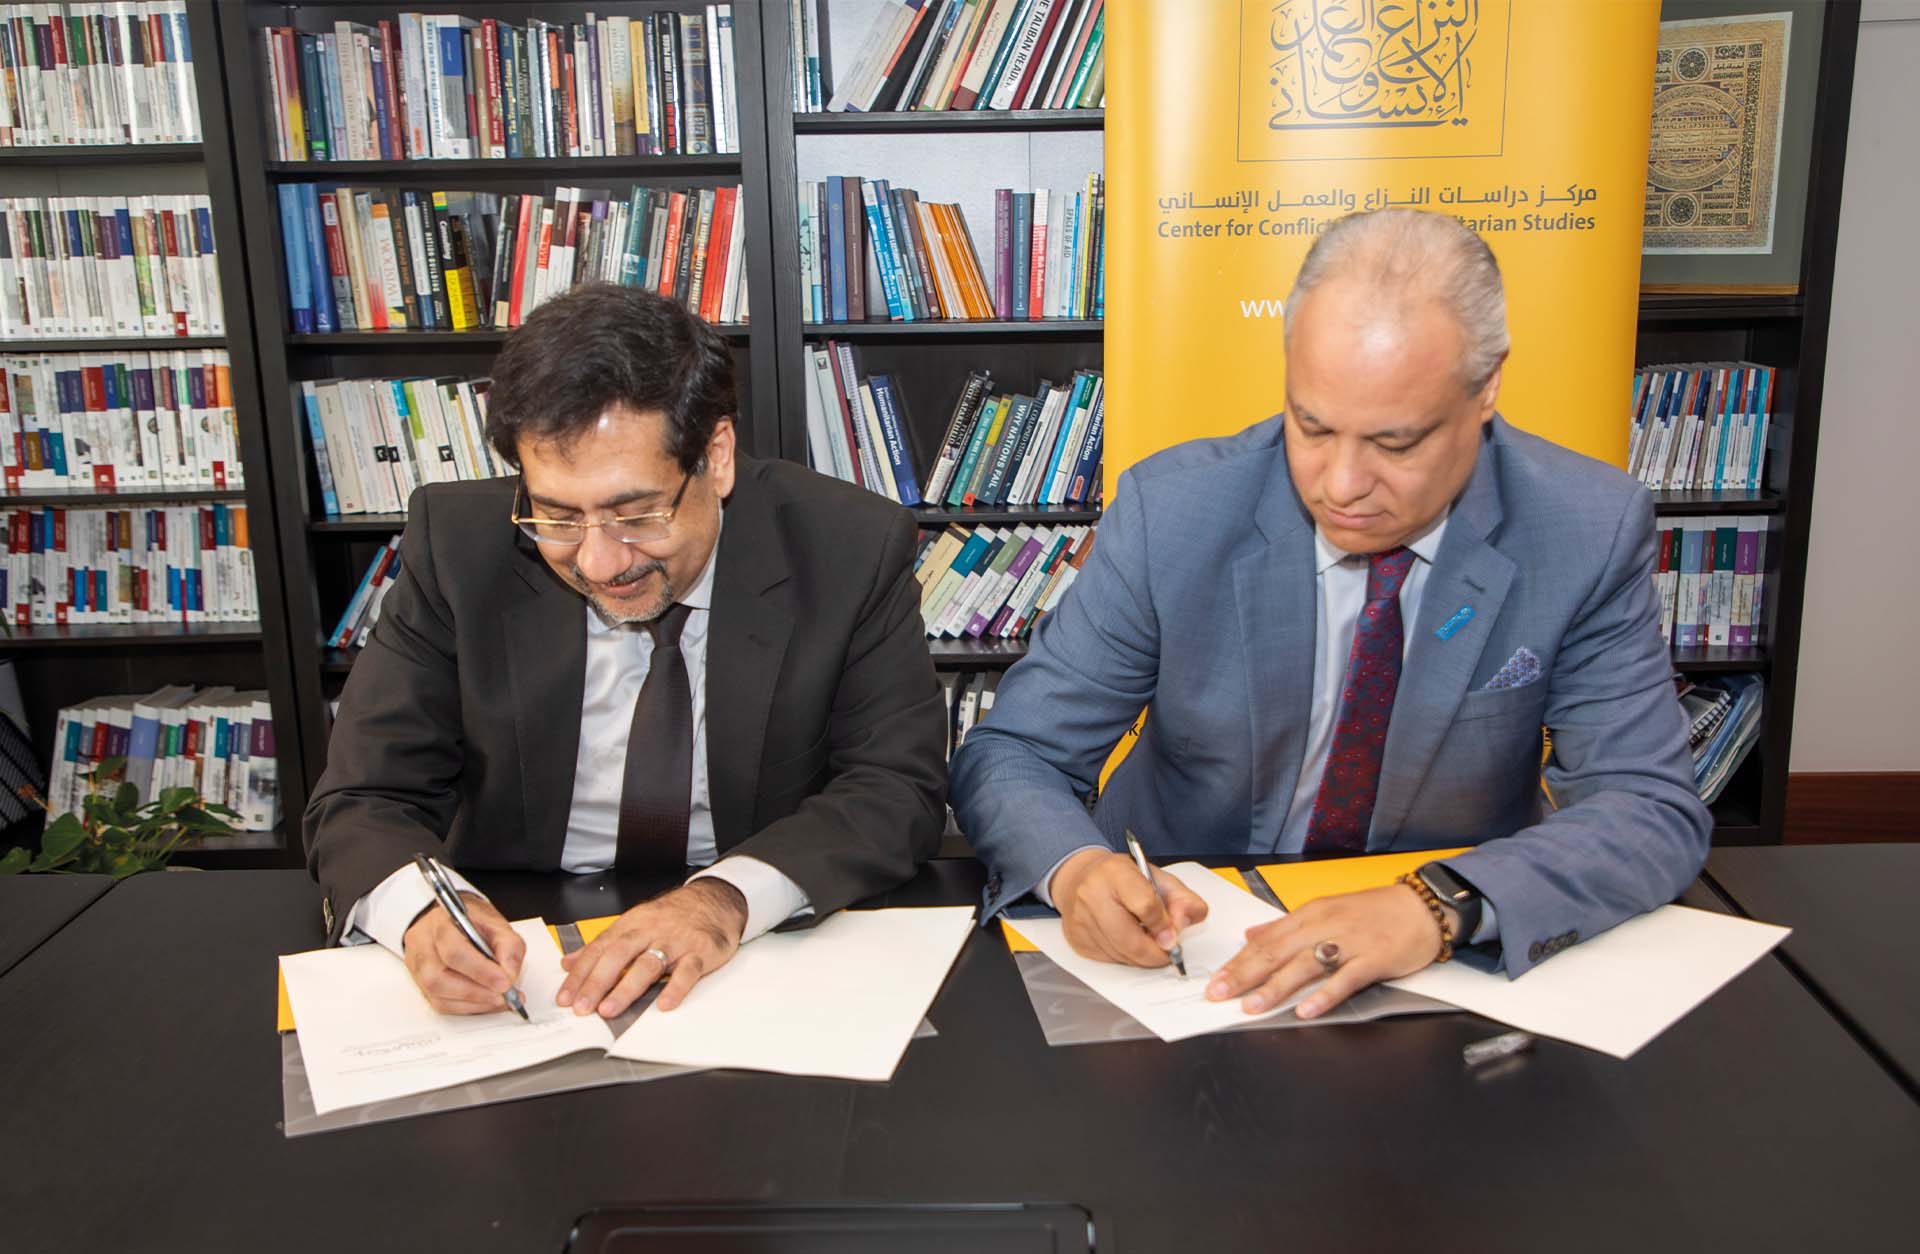 Ghassan Elkahlout and Khaled Khalifa signing the agreement